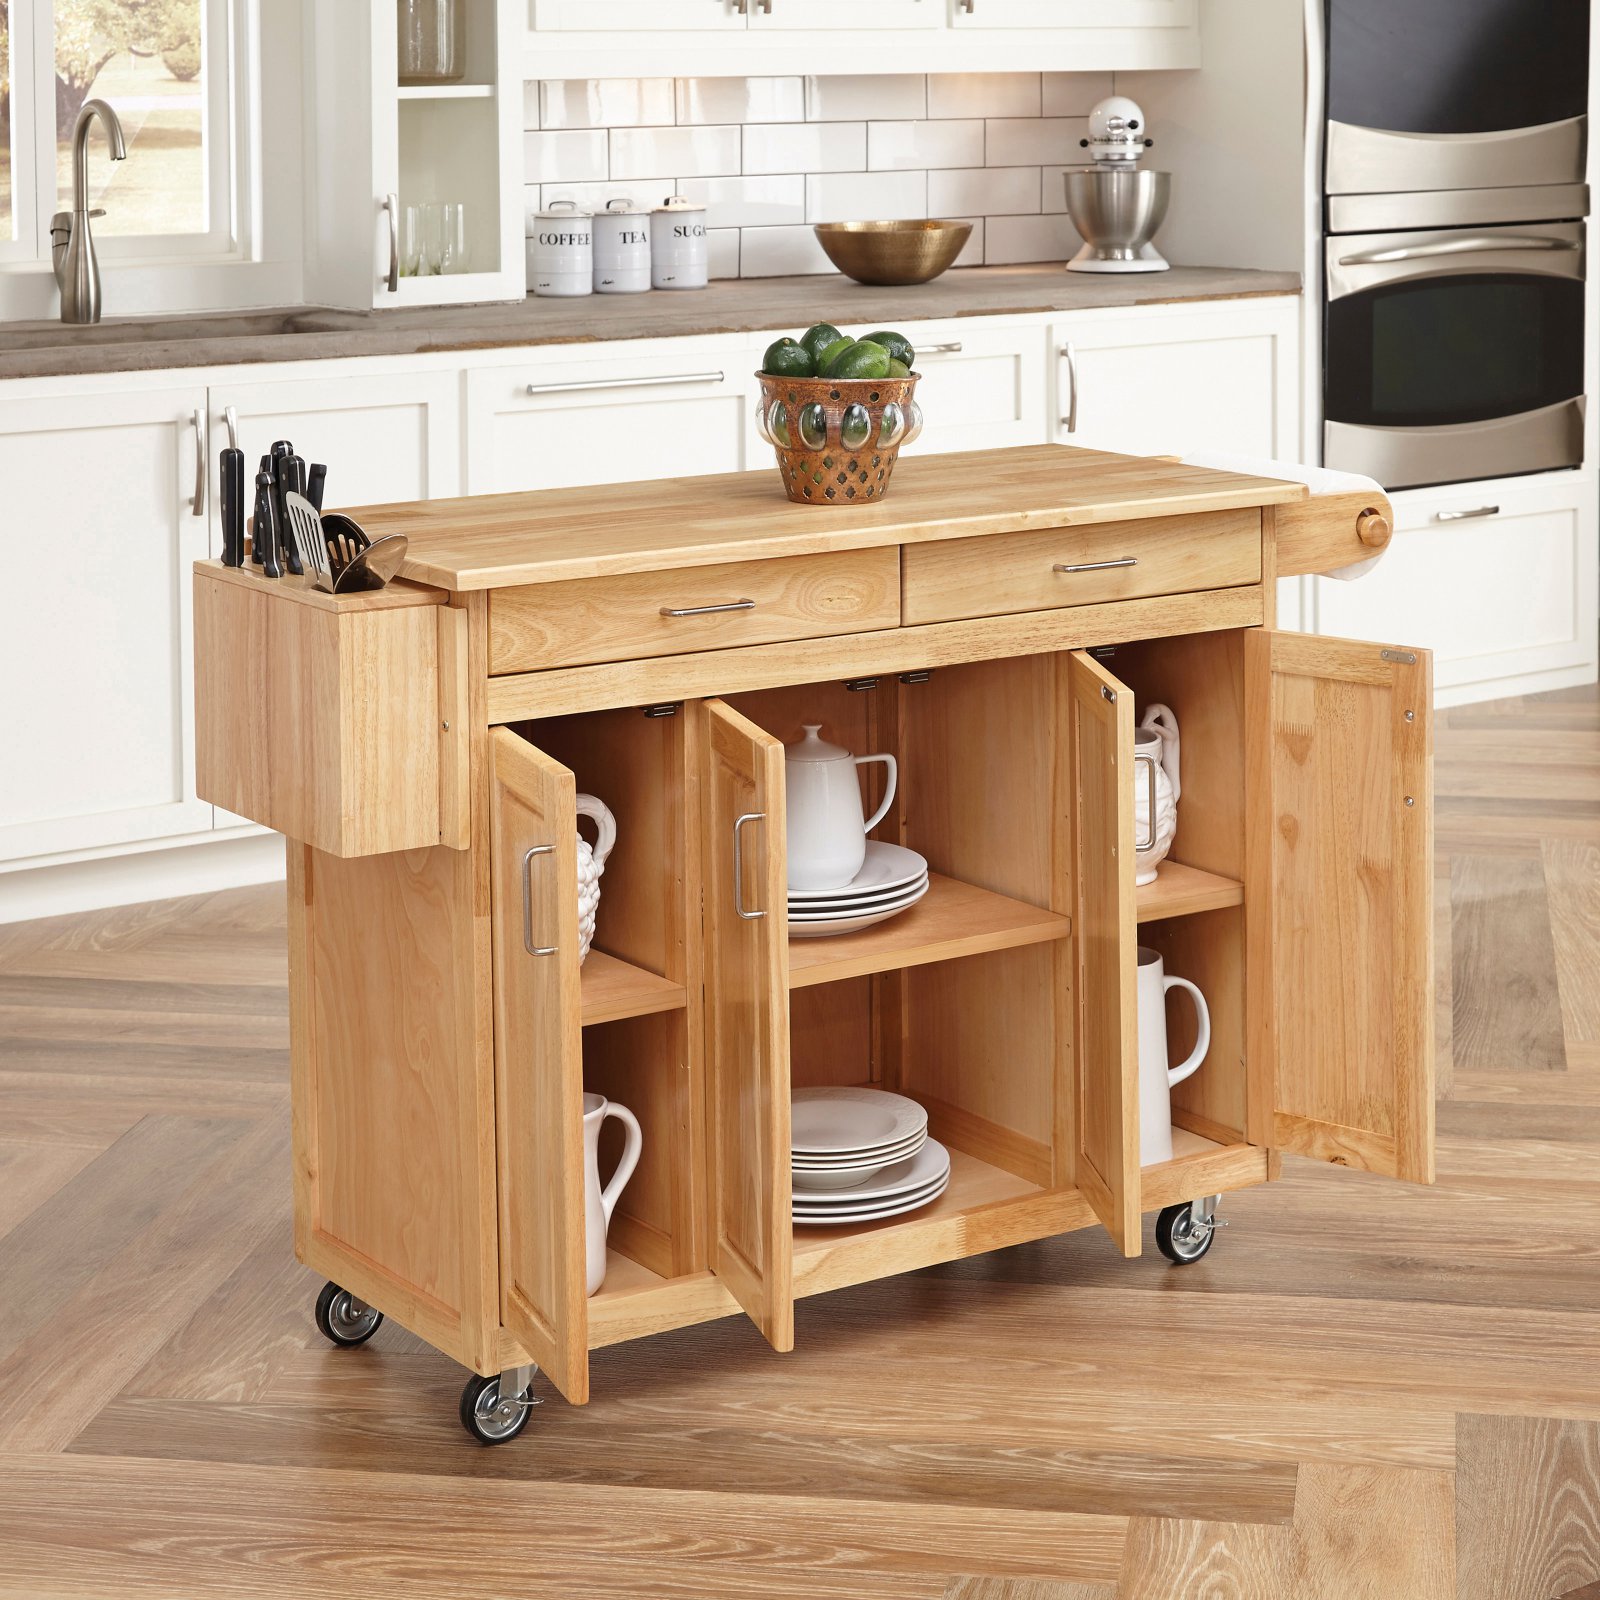 Homestyles General Line Wood Rolling Kitchen Cart in Brown - image 5 of 5